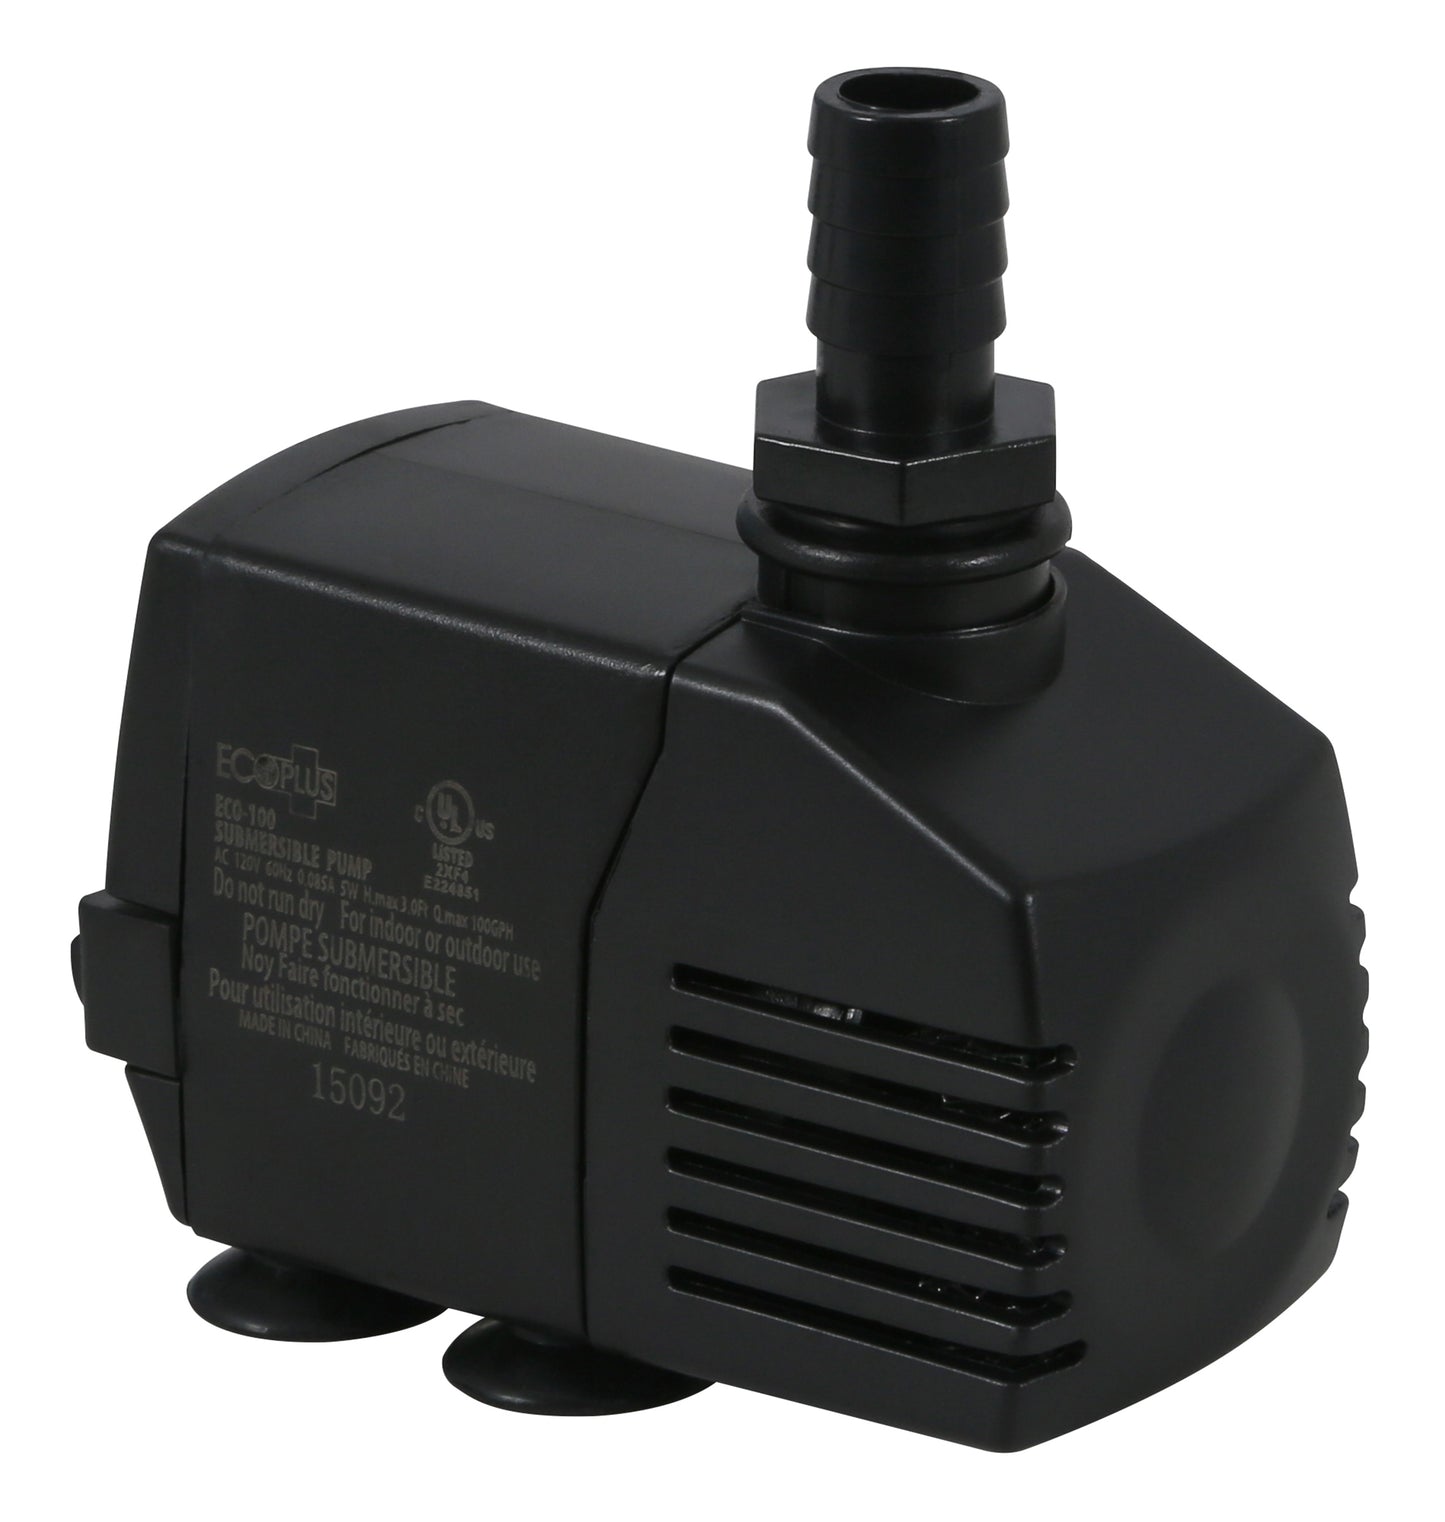 EcoPlus Eco 100 Fixed Flow Submersible Only Pump